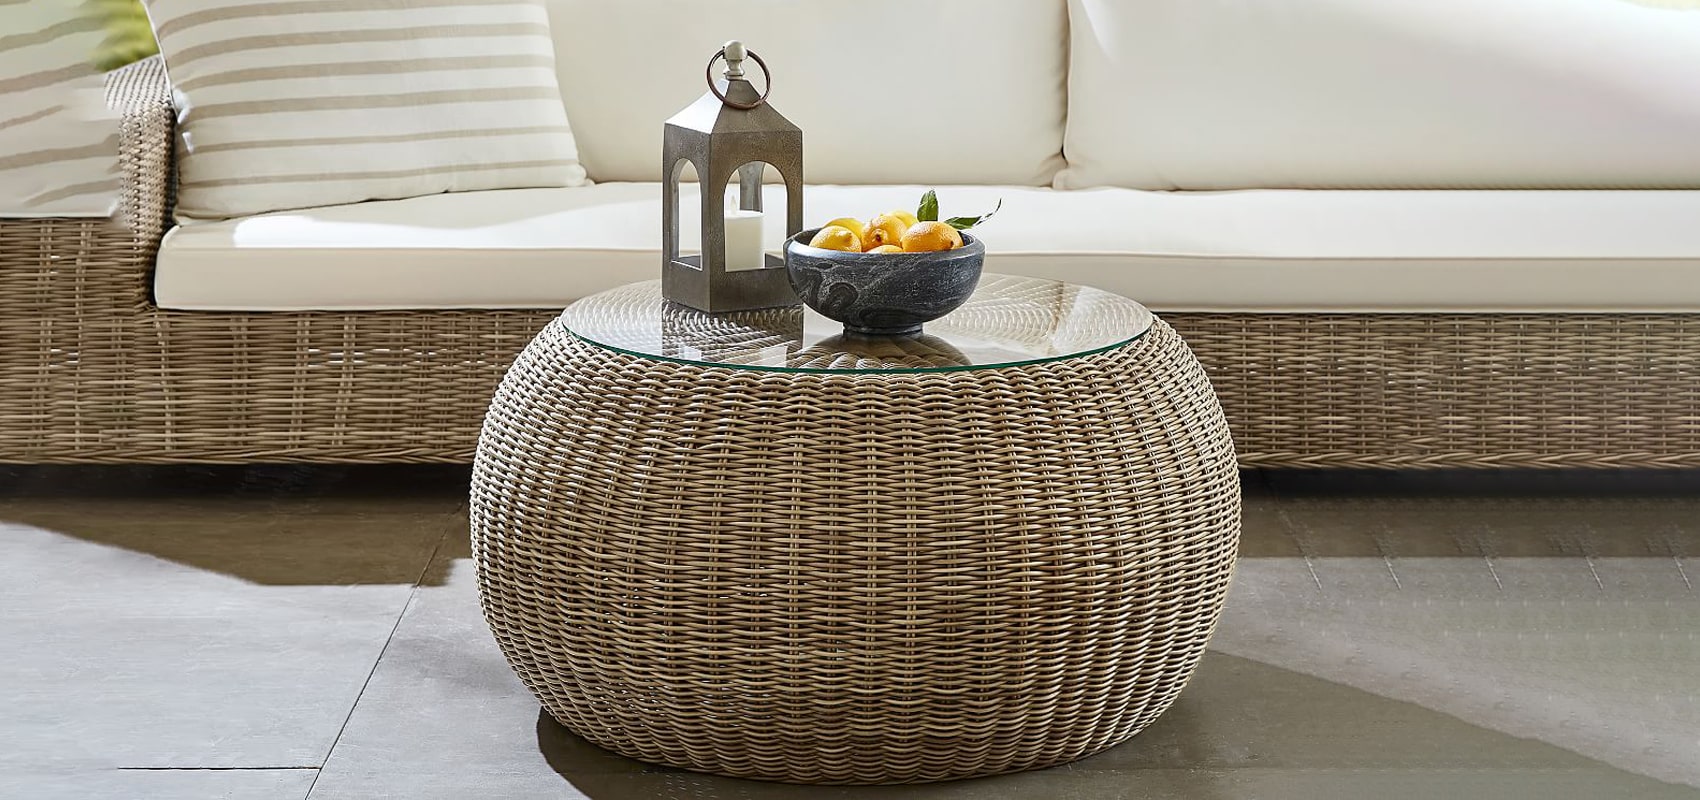 Living Room Poufs & Colorful Poufs | Additional Surface Area